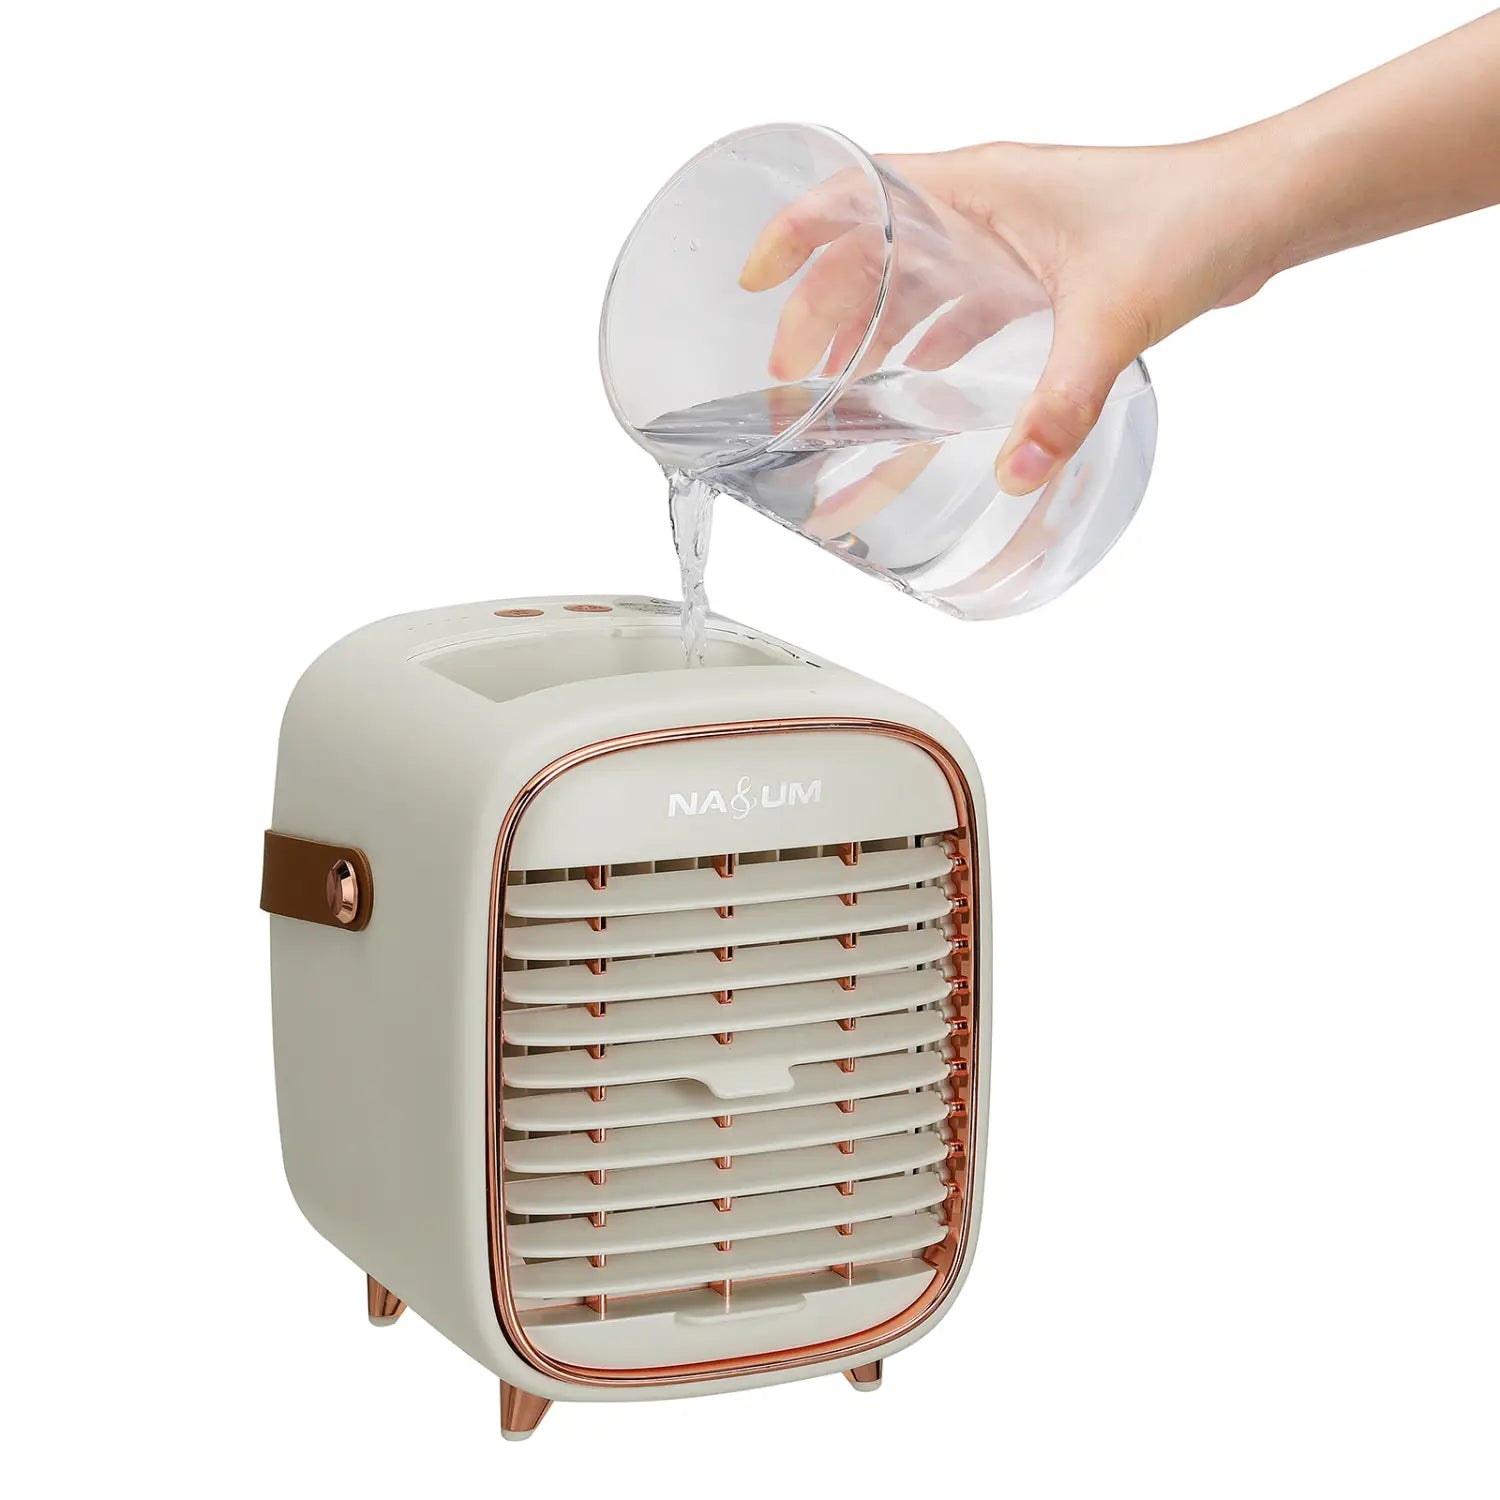 3-in-1 Mini Air Cooler Usb Portable Air-conditioning